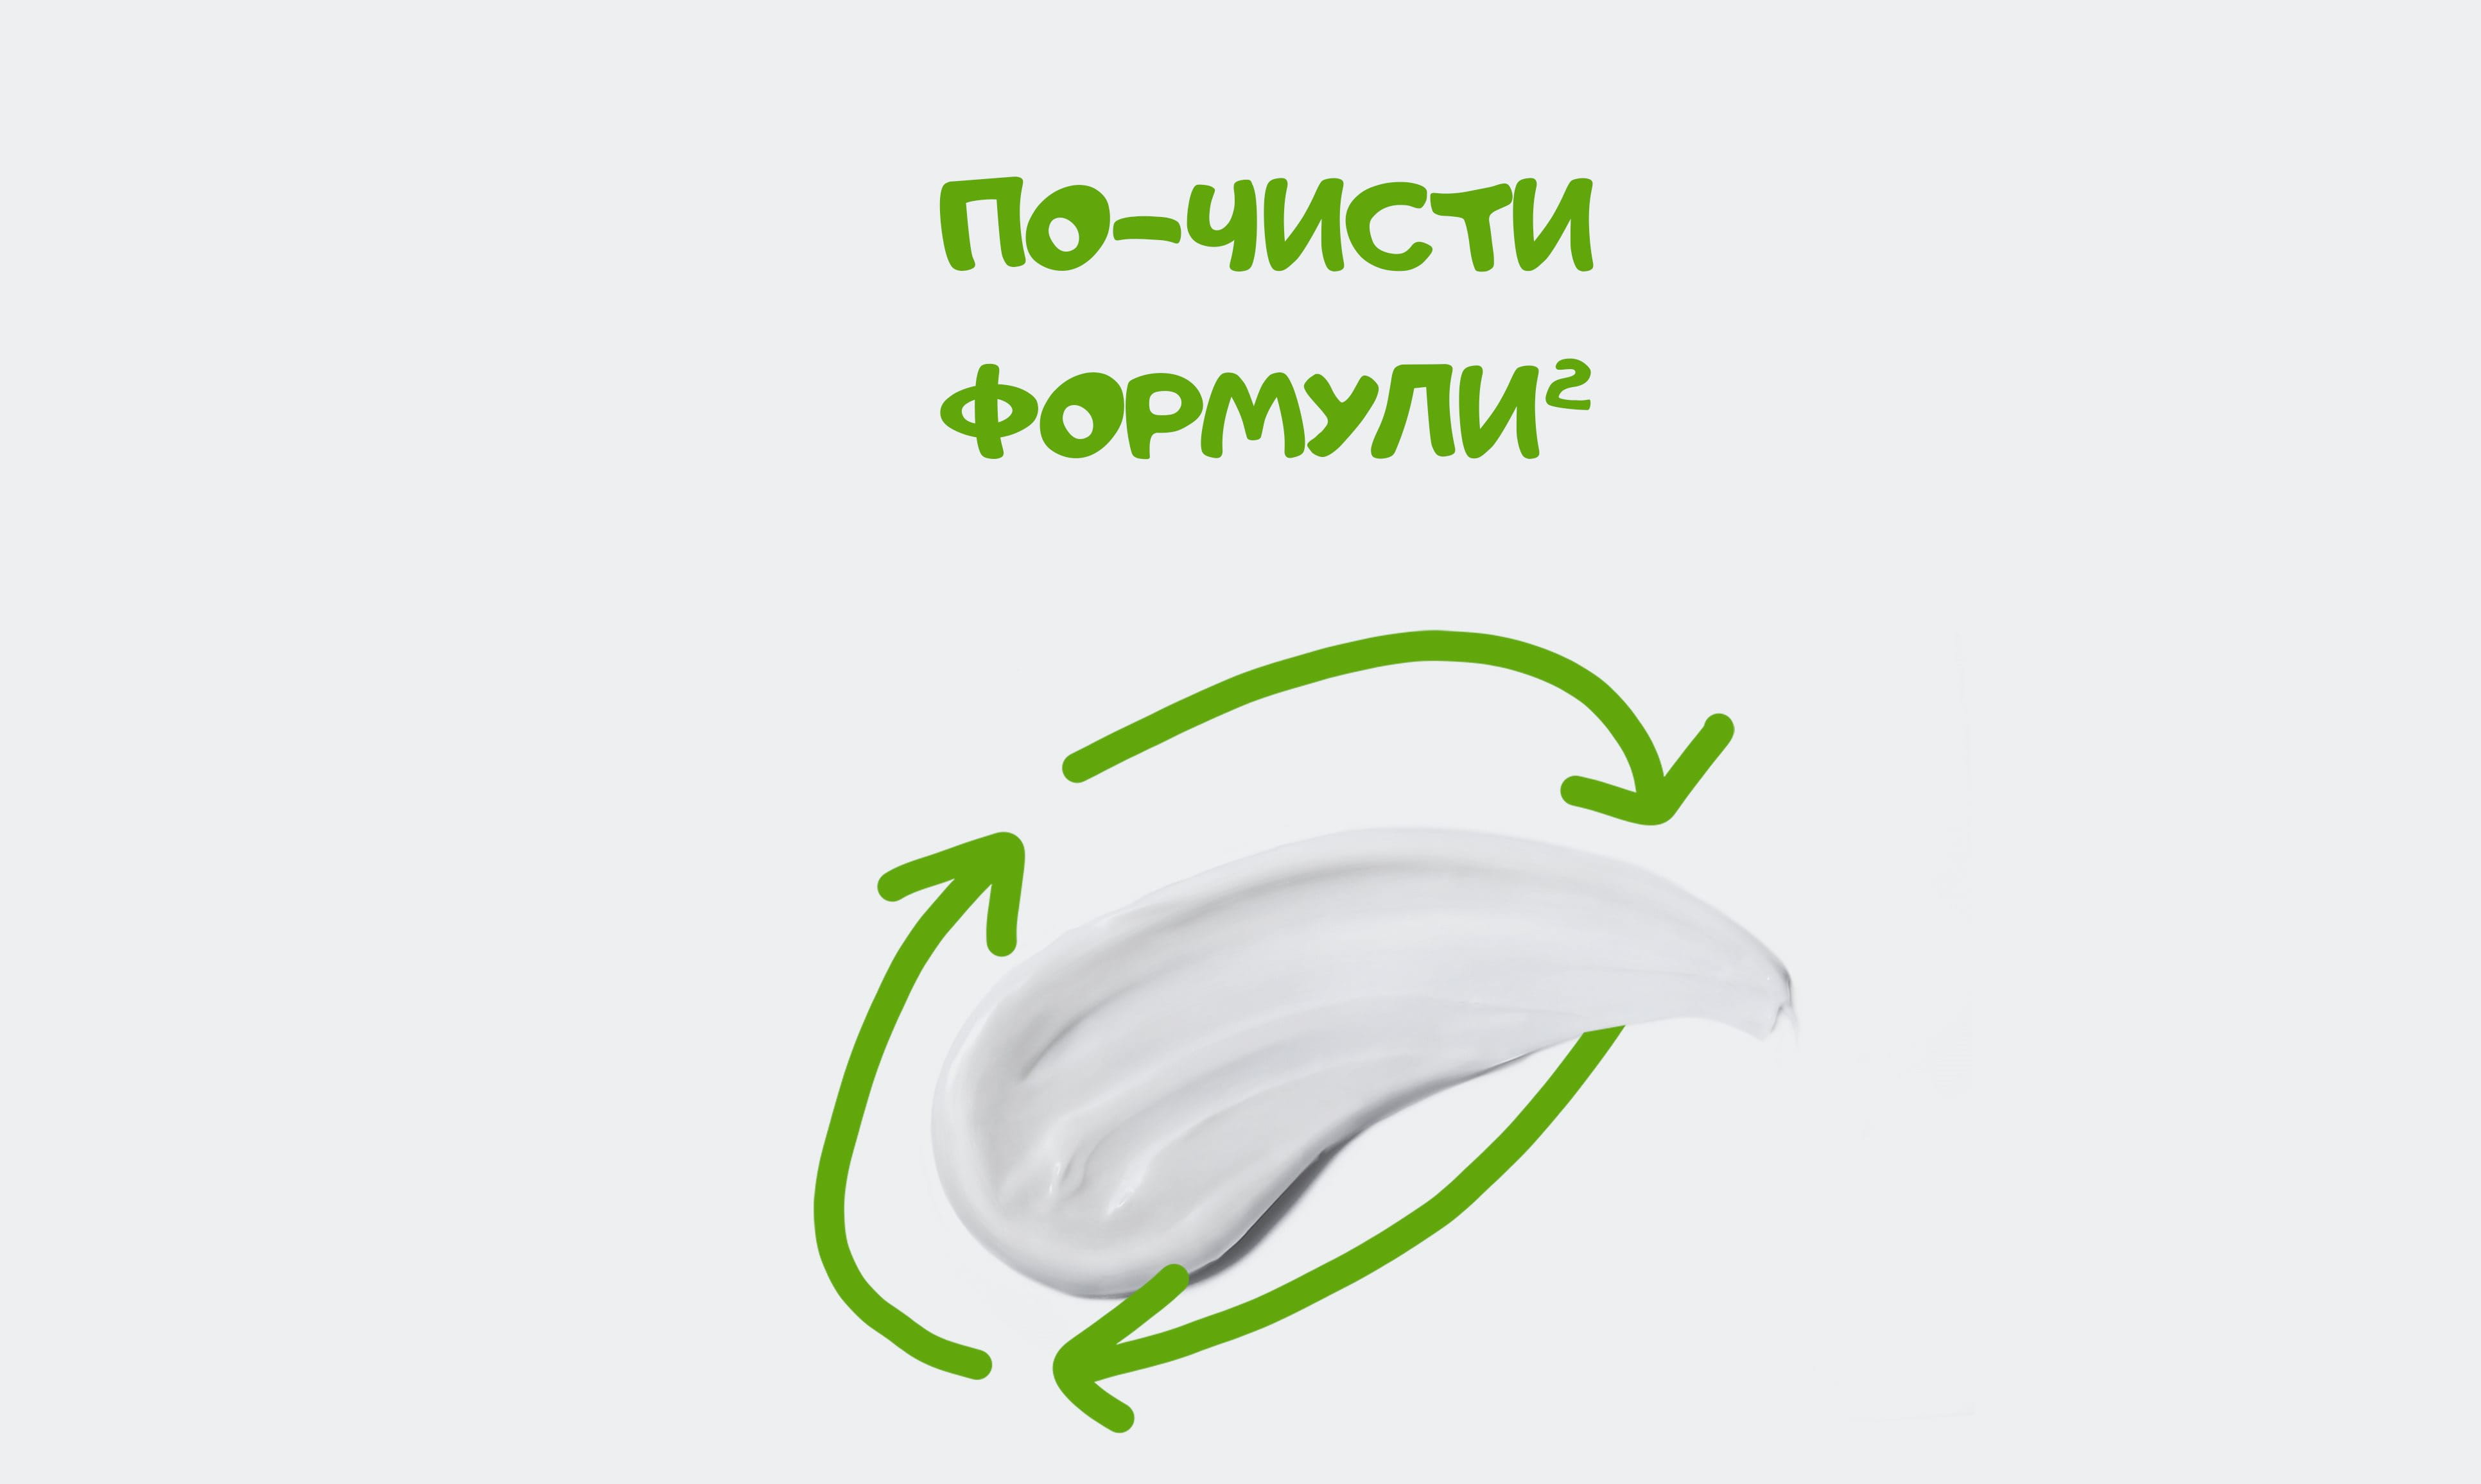 A smear of lotion encircled by a stylized recycling symbol